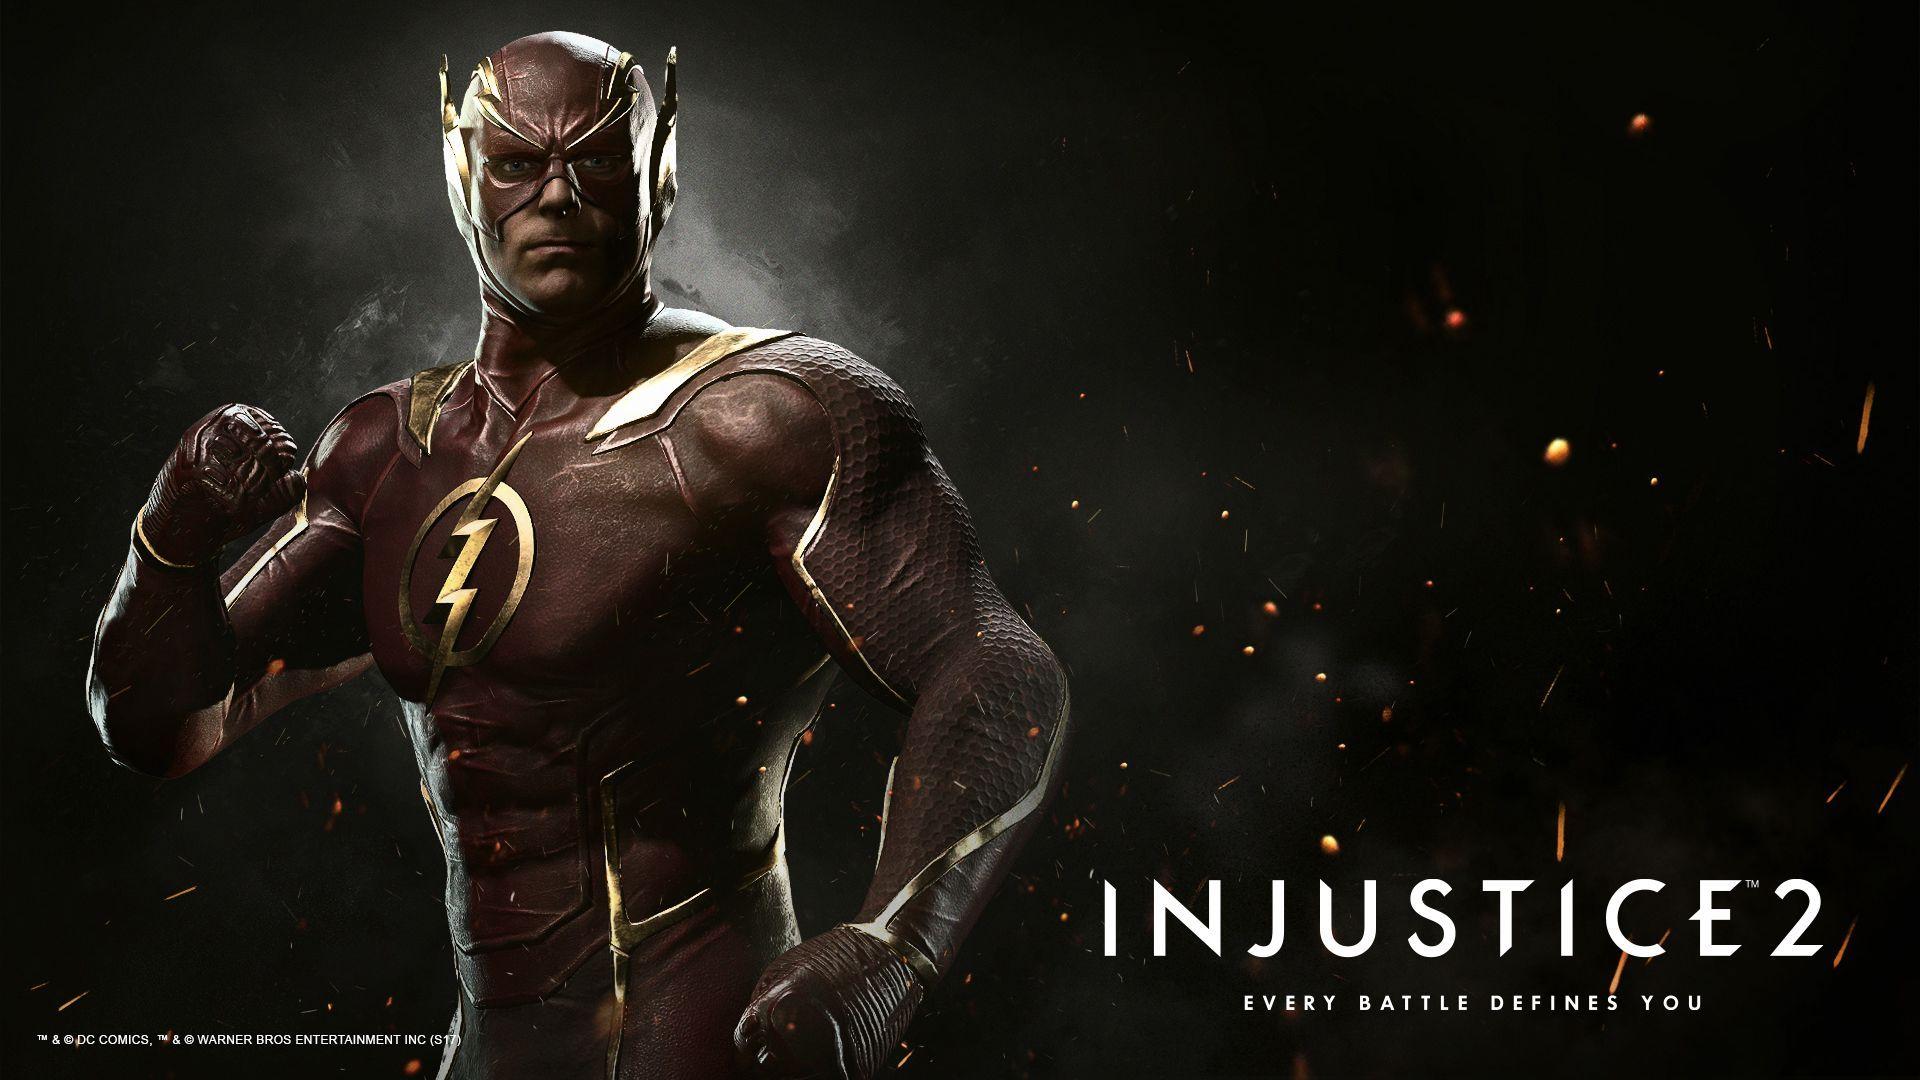 The Flash Injustice 2 Wallpaper. DC Database